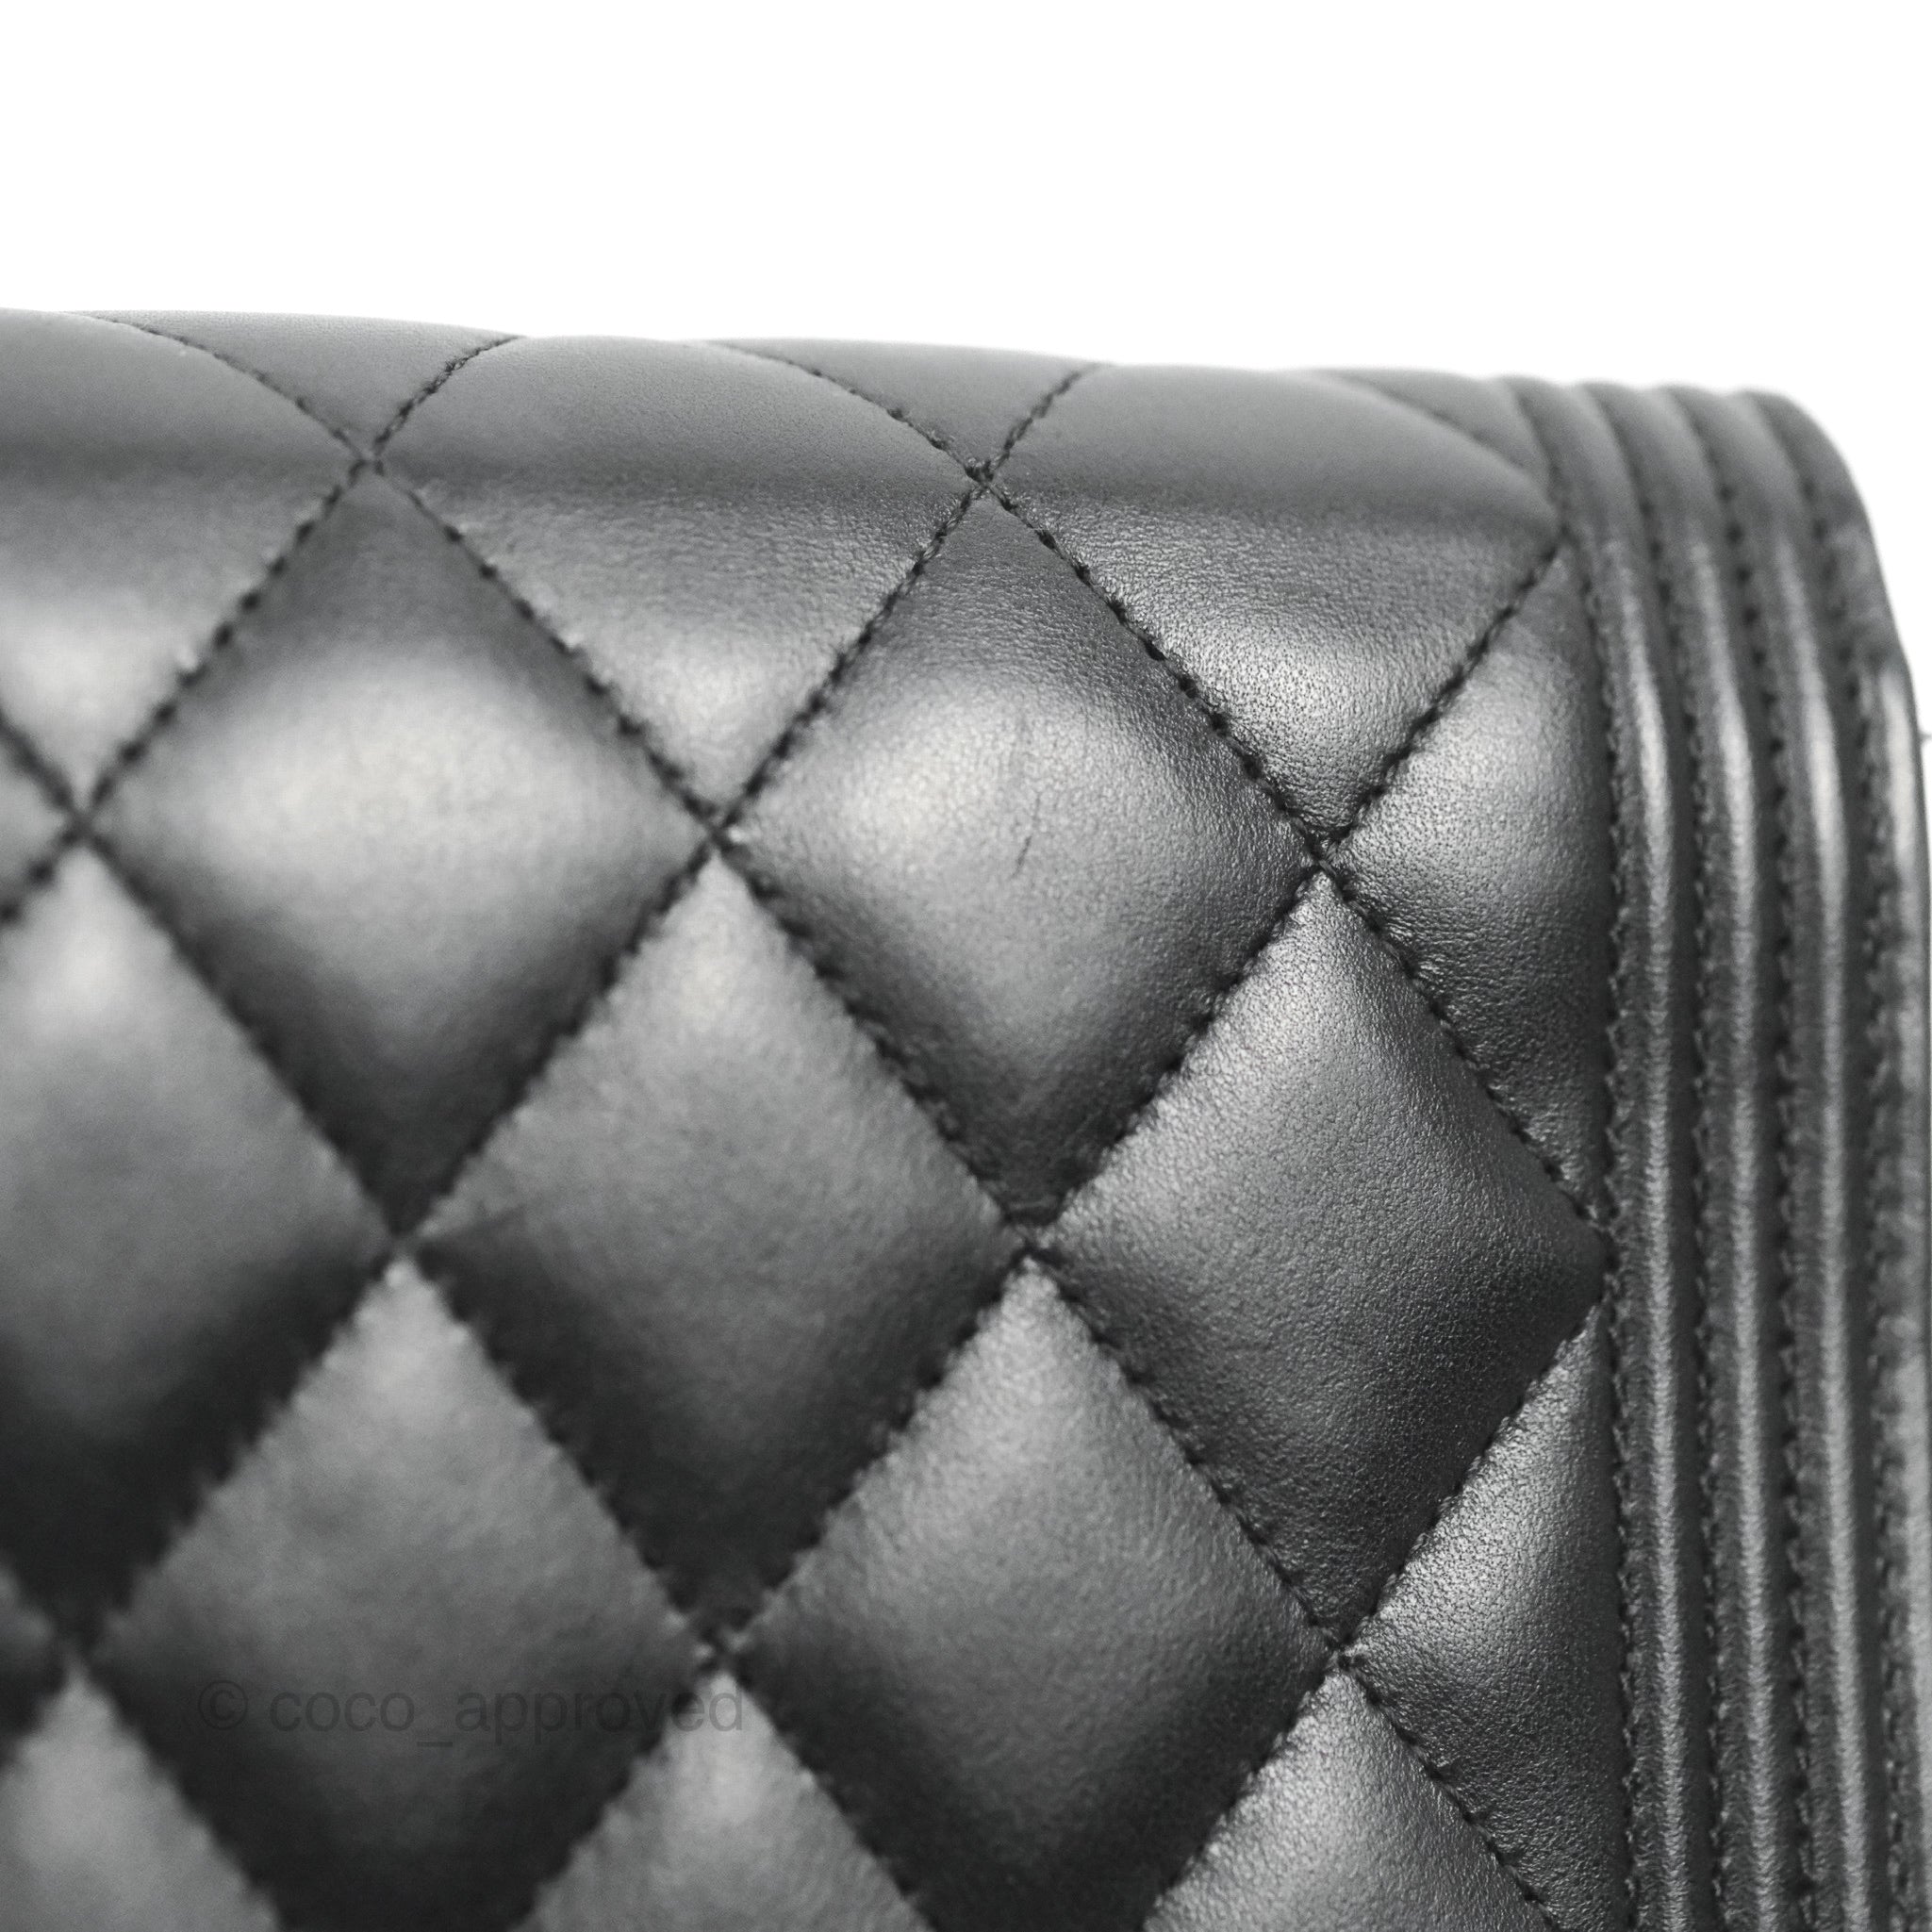 Chanel Quilted Classic Wallet on Chain WOC Green Lambskin Silver Hardw –  Coco Approved Studio